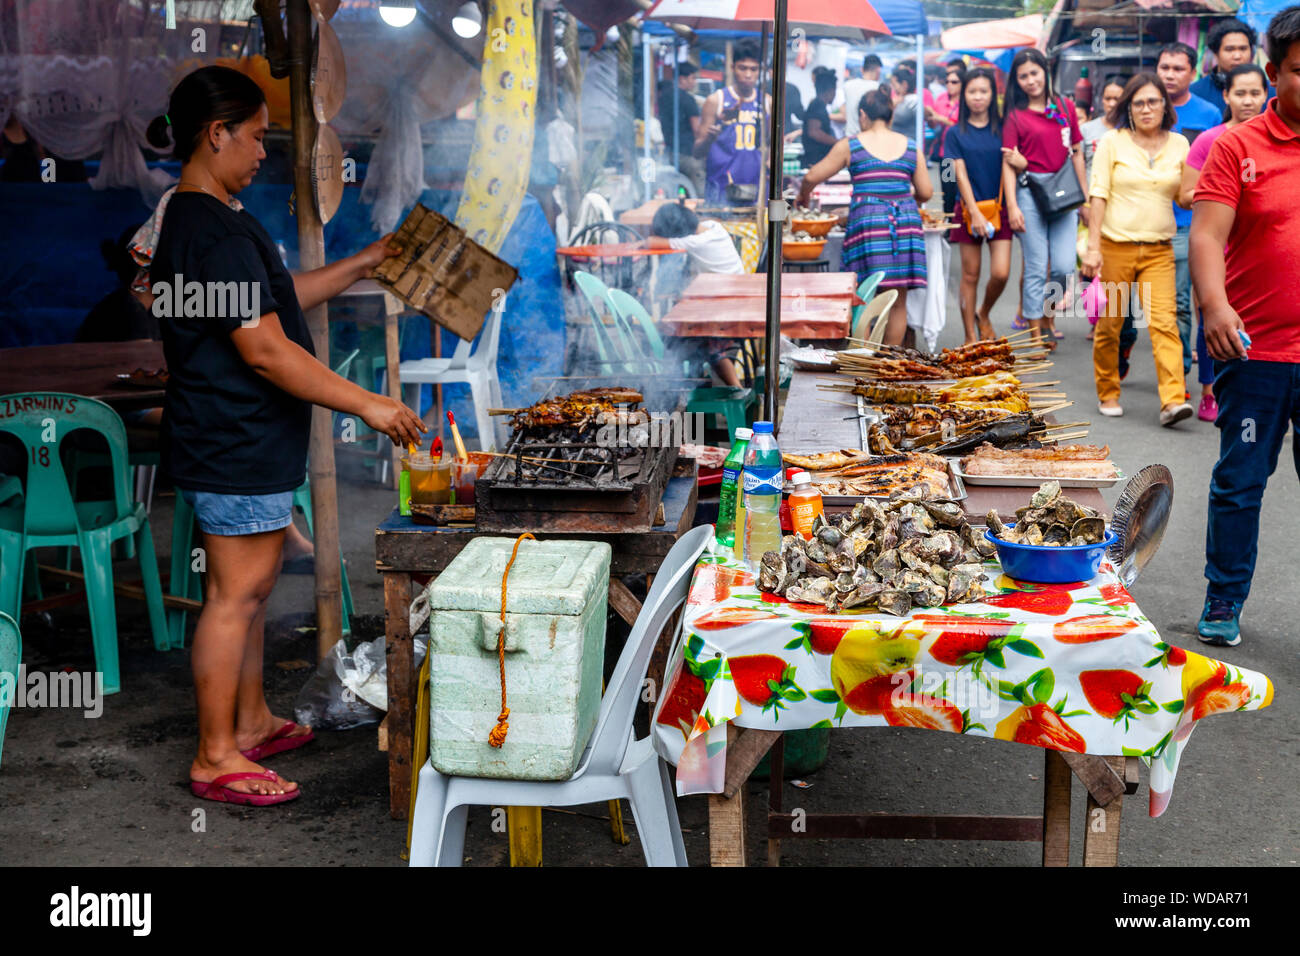 Filipino Street Food, A Filipino Woman Cooking Meat On A Grill, Iloilo City, Panay Island, The Philippines Stock Photo